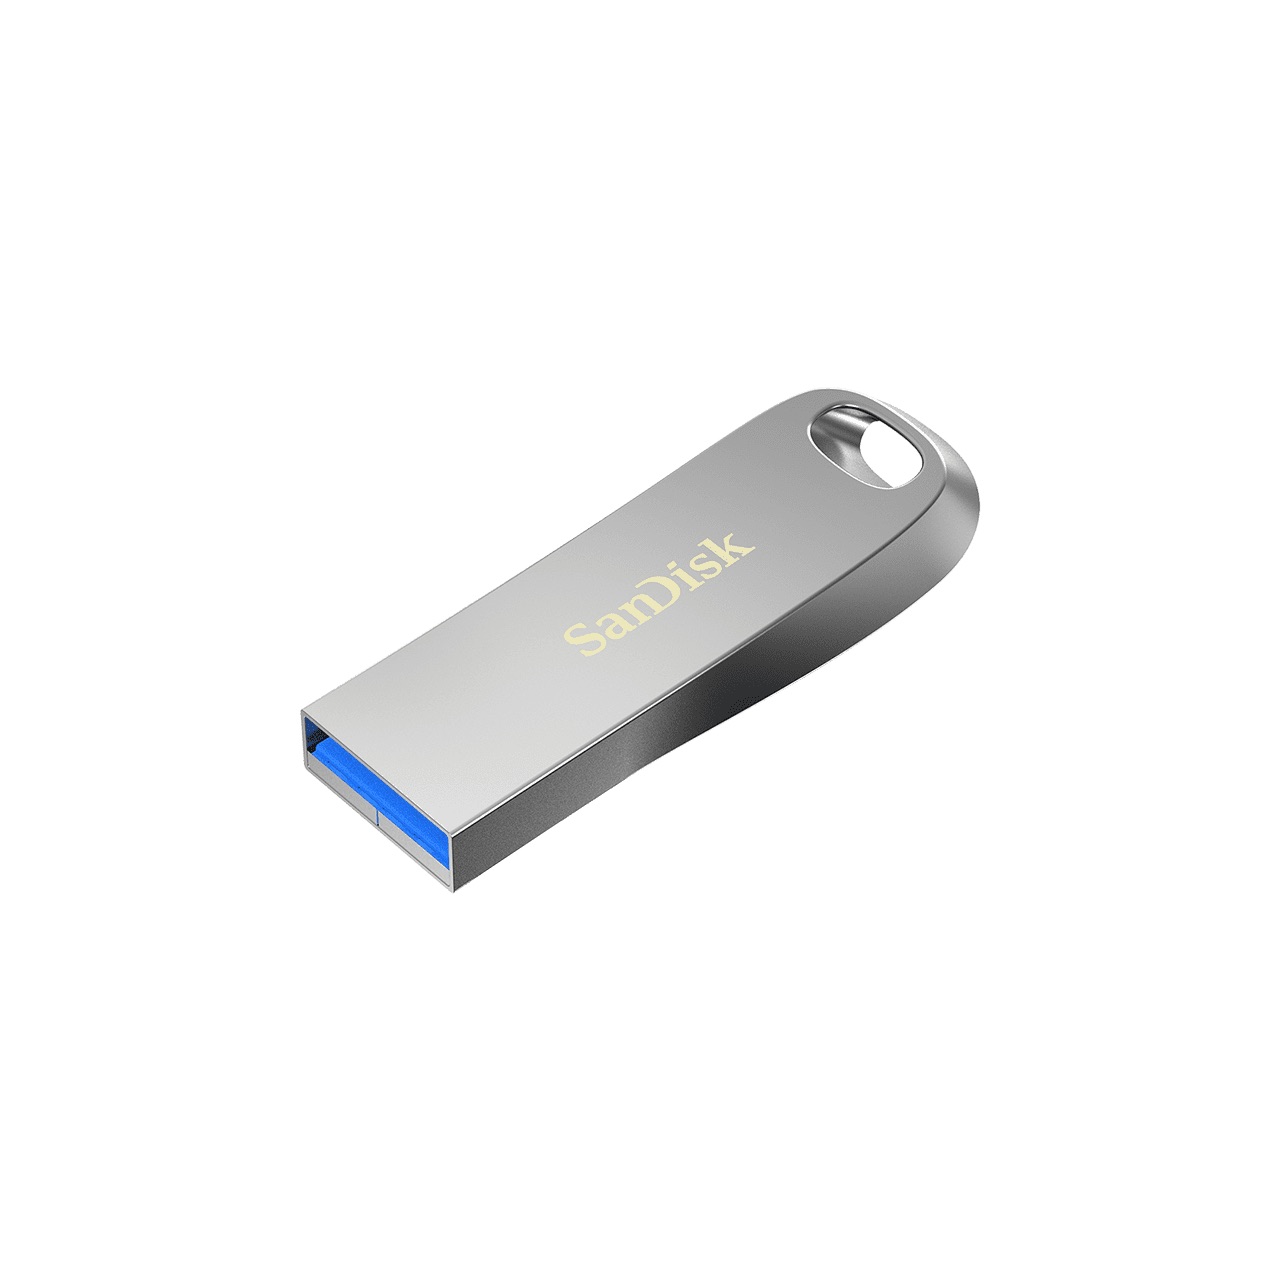 You may also be interested in the SanDisk SDCZ74-016G-A46 Ultra 16GB USB 3.1 Type....